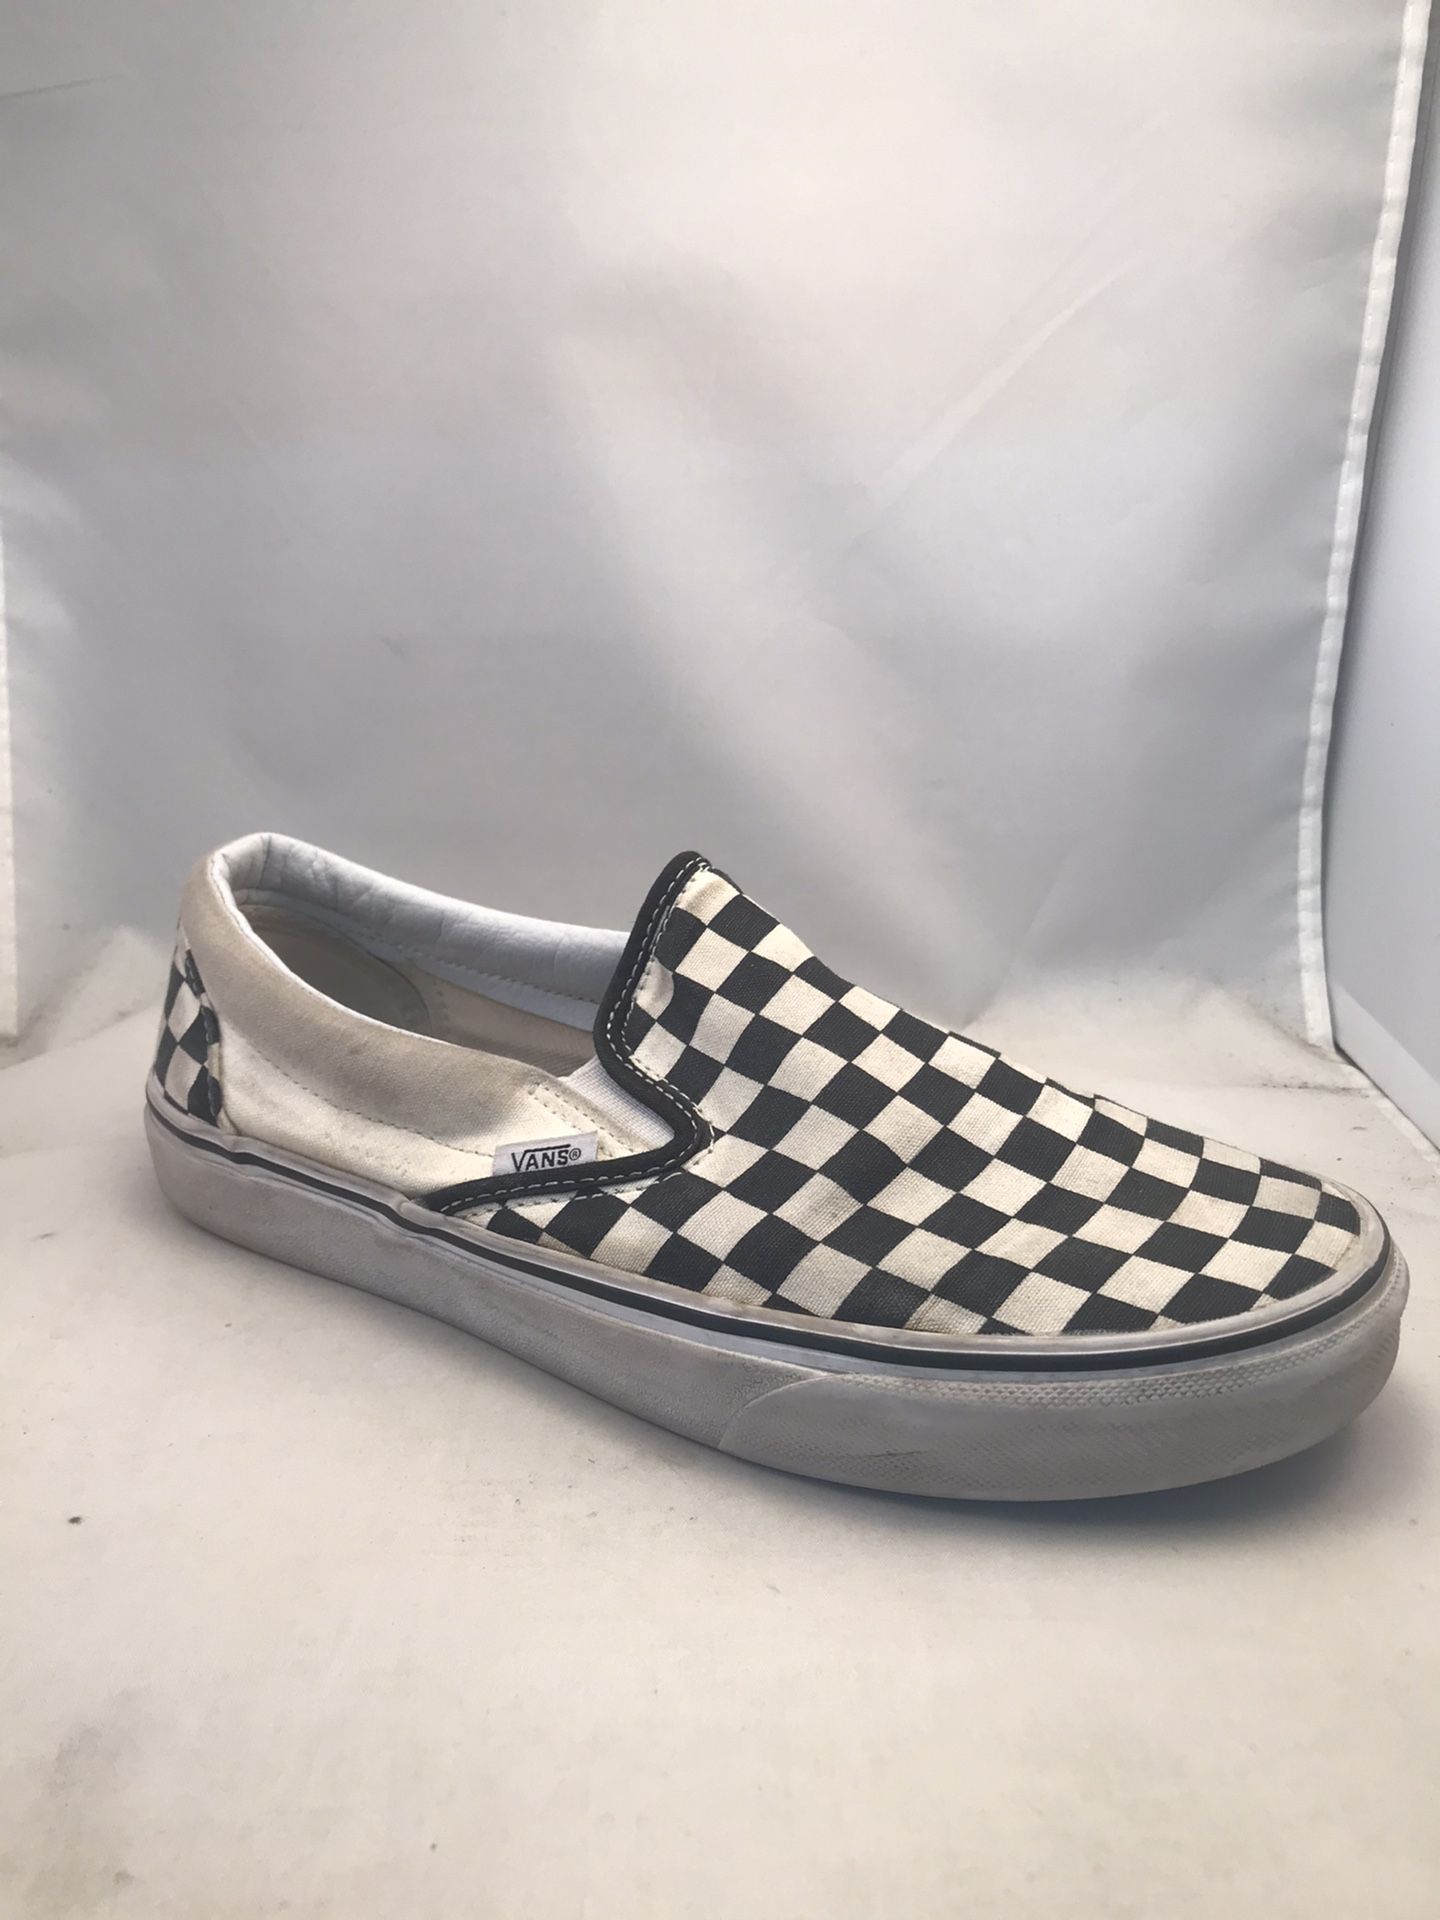 Vans Classic Slip On Skateboarding or Casual Shoes